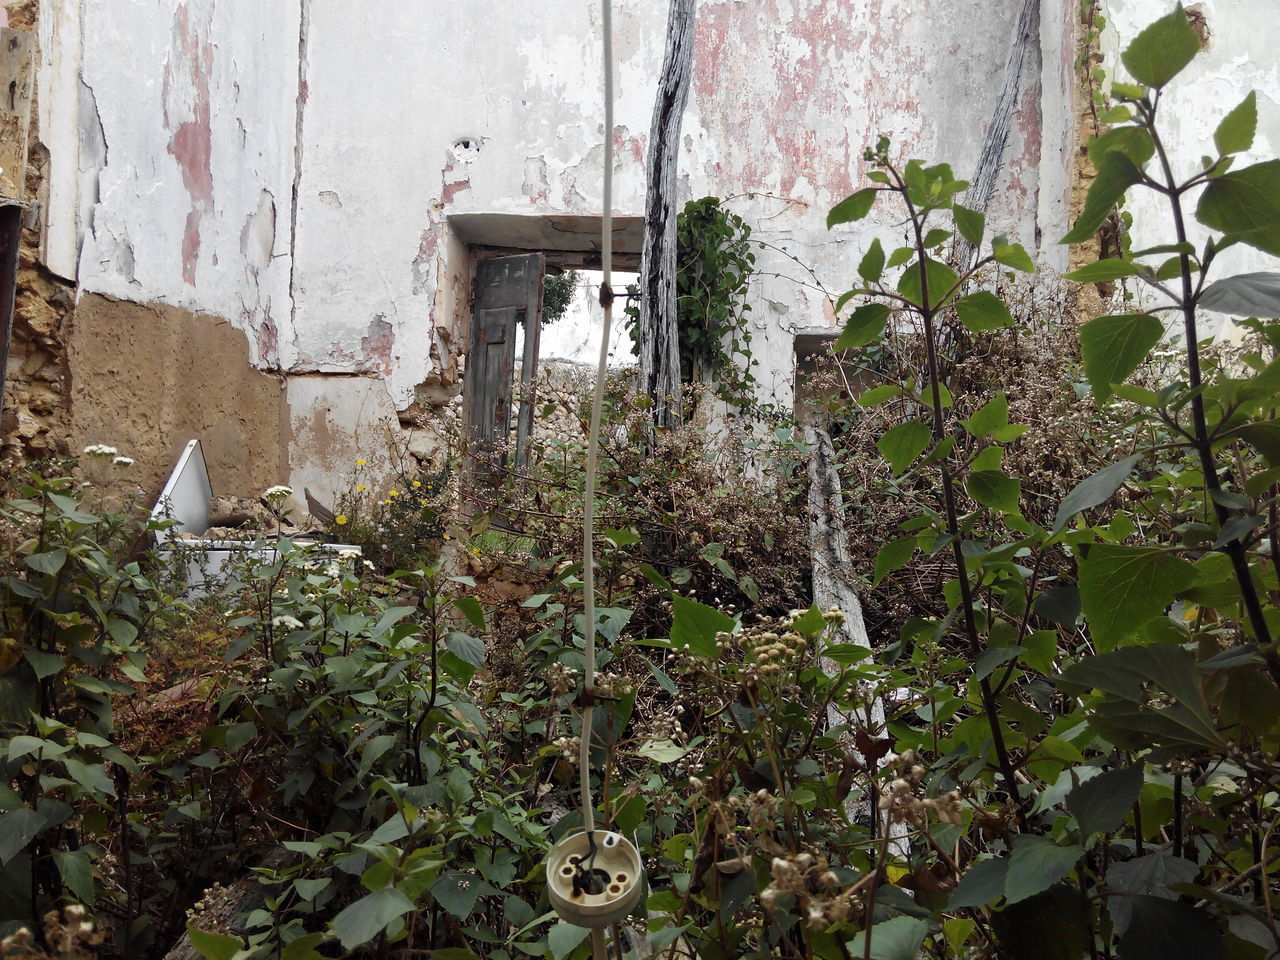 IVY GROWING ON ABANDONED HOUSE